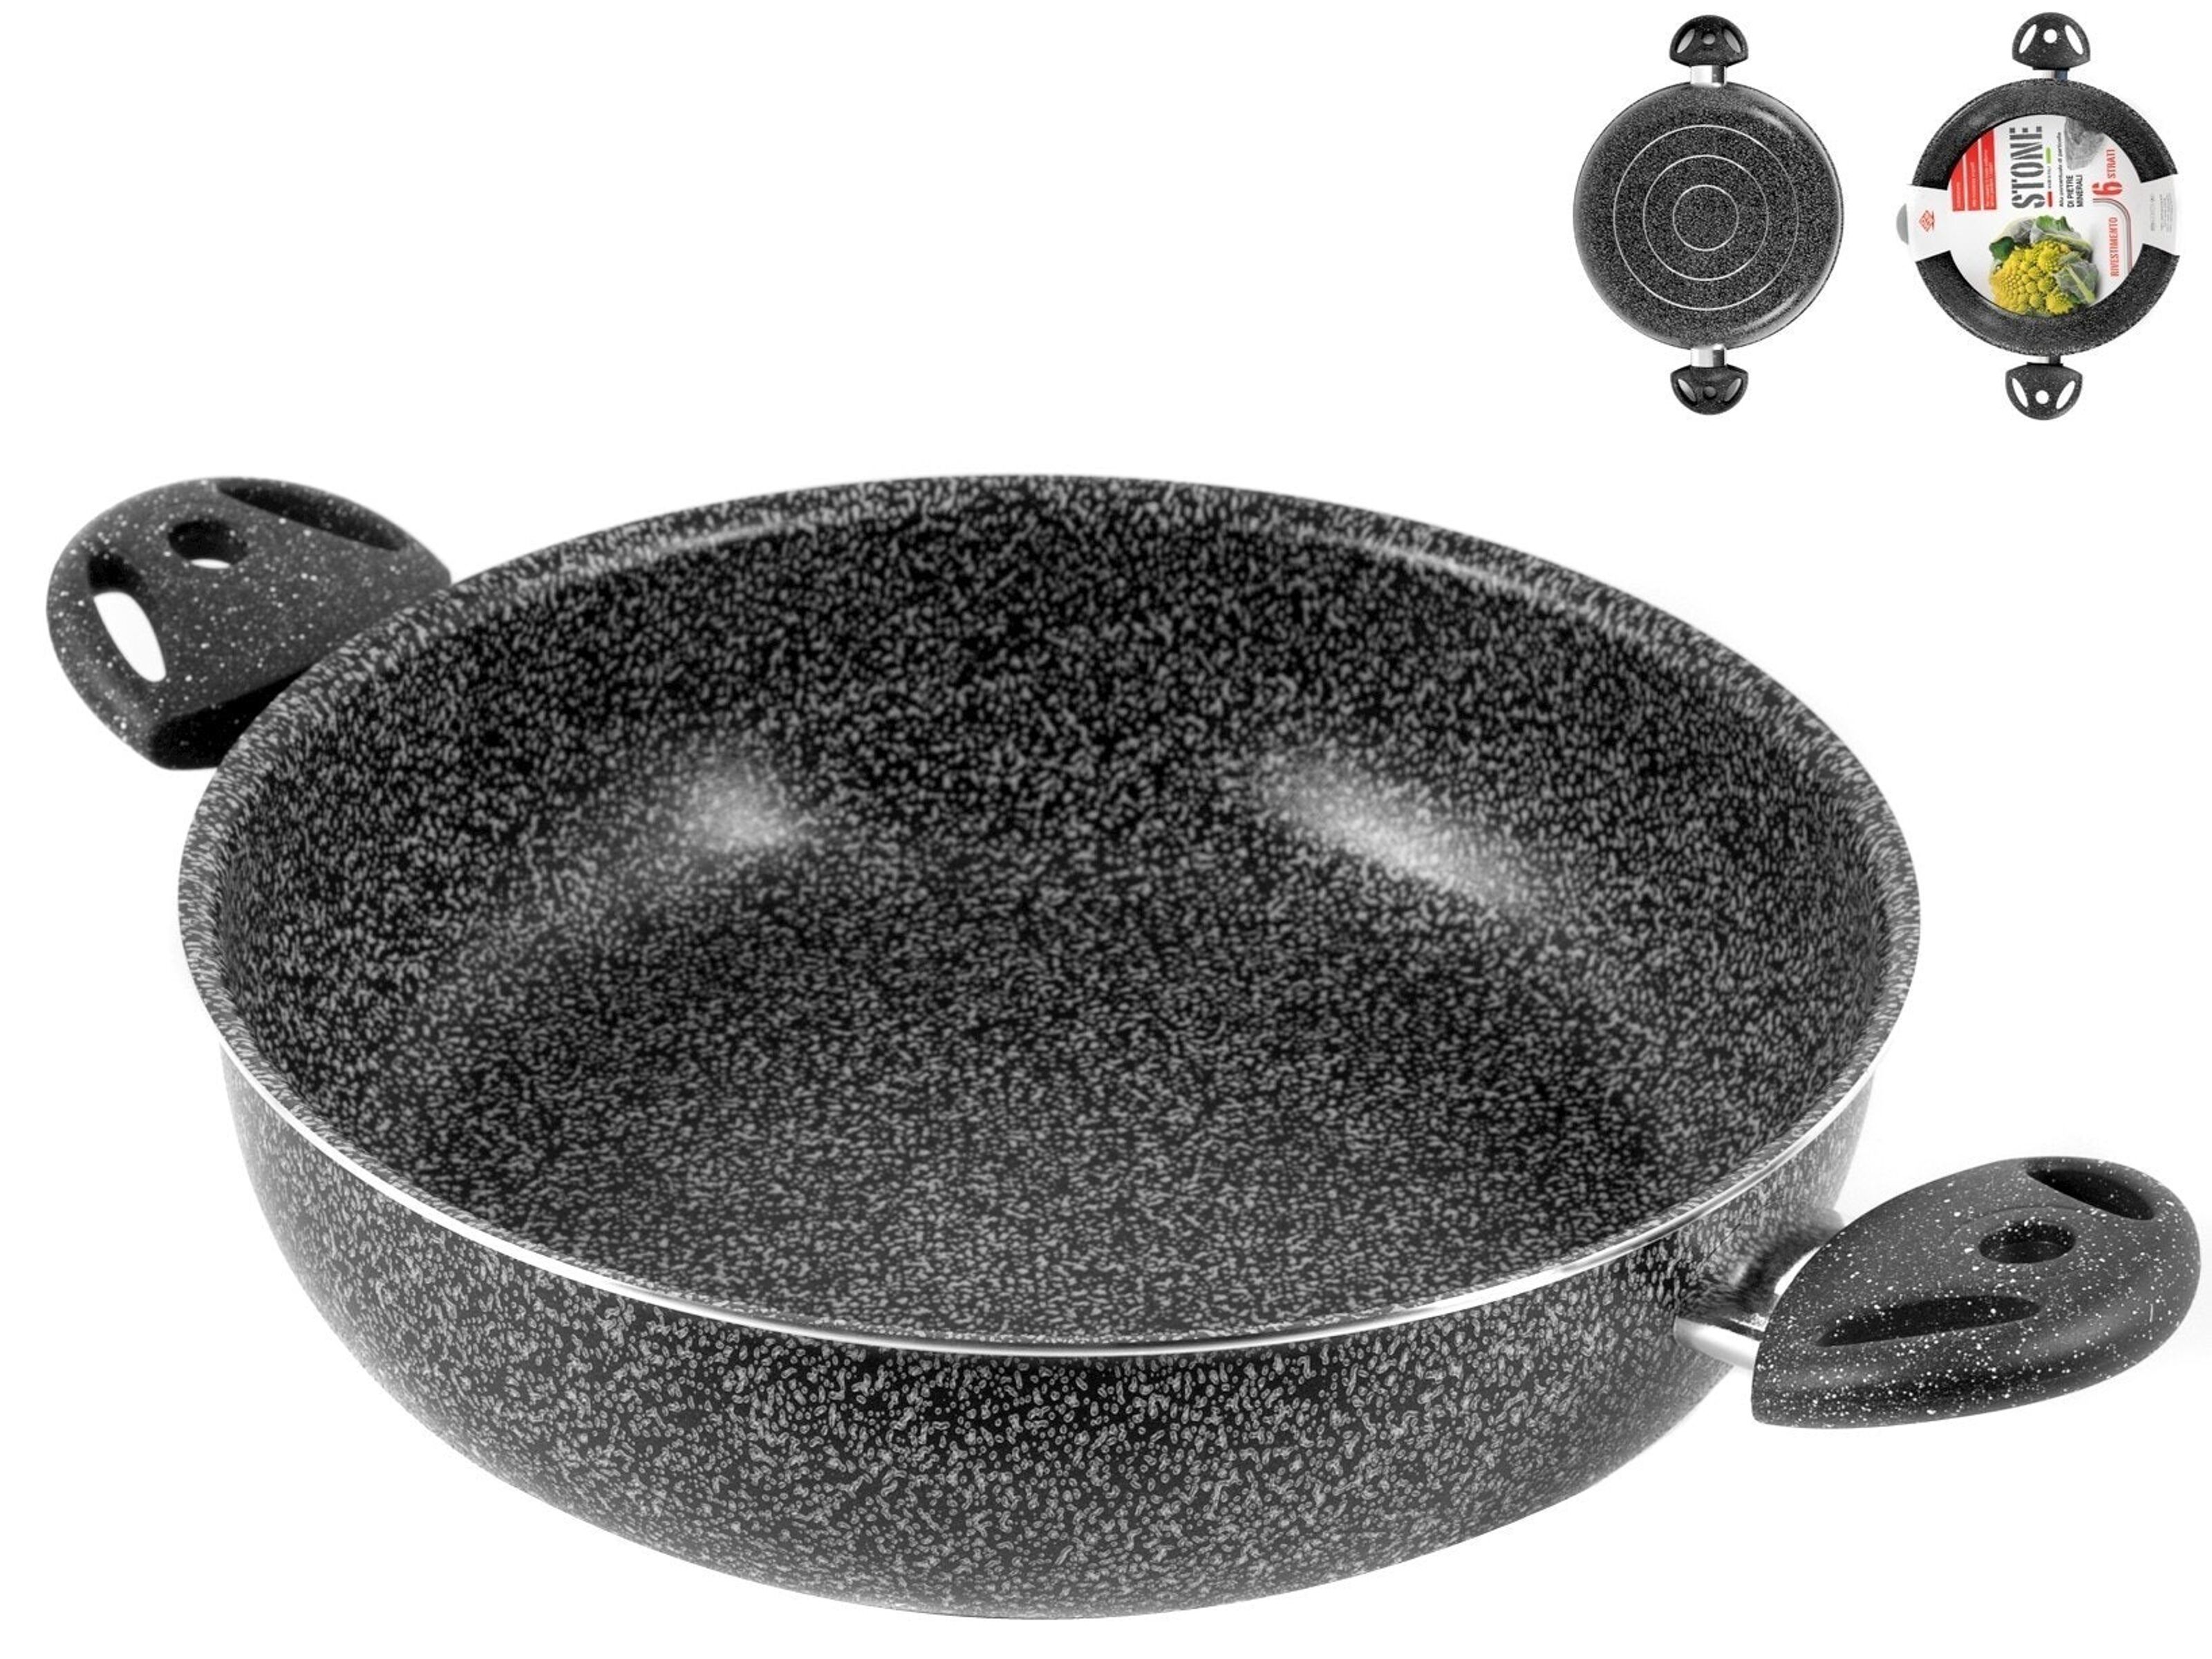 Frying pan 28 cm with non-stick coating Glamour Stone - Glamour